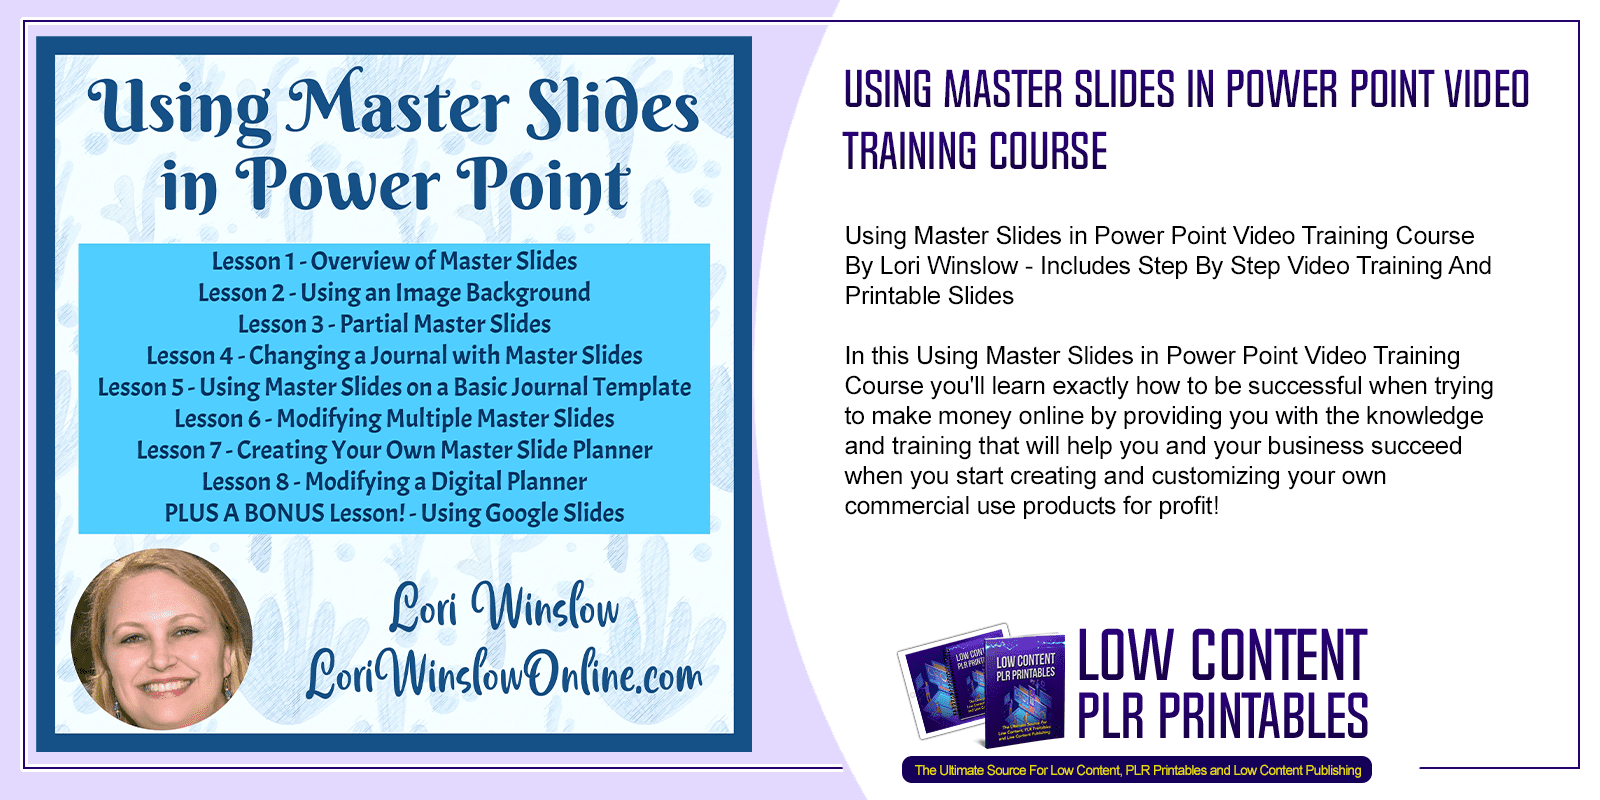 Using Master Slides in Power Point Video Training Course